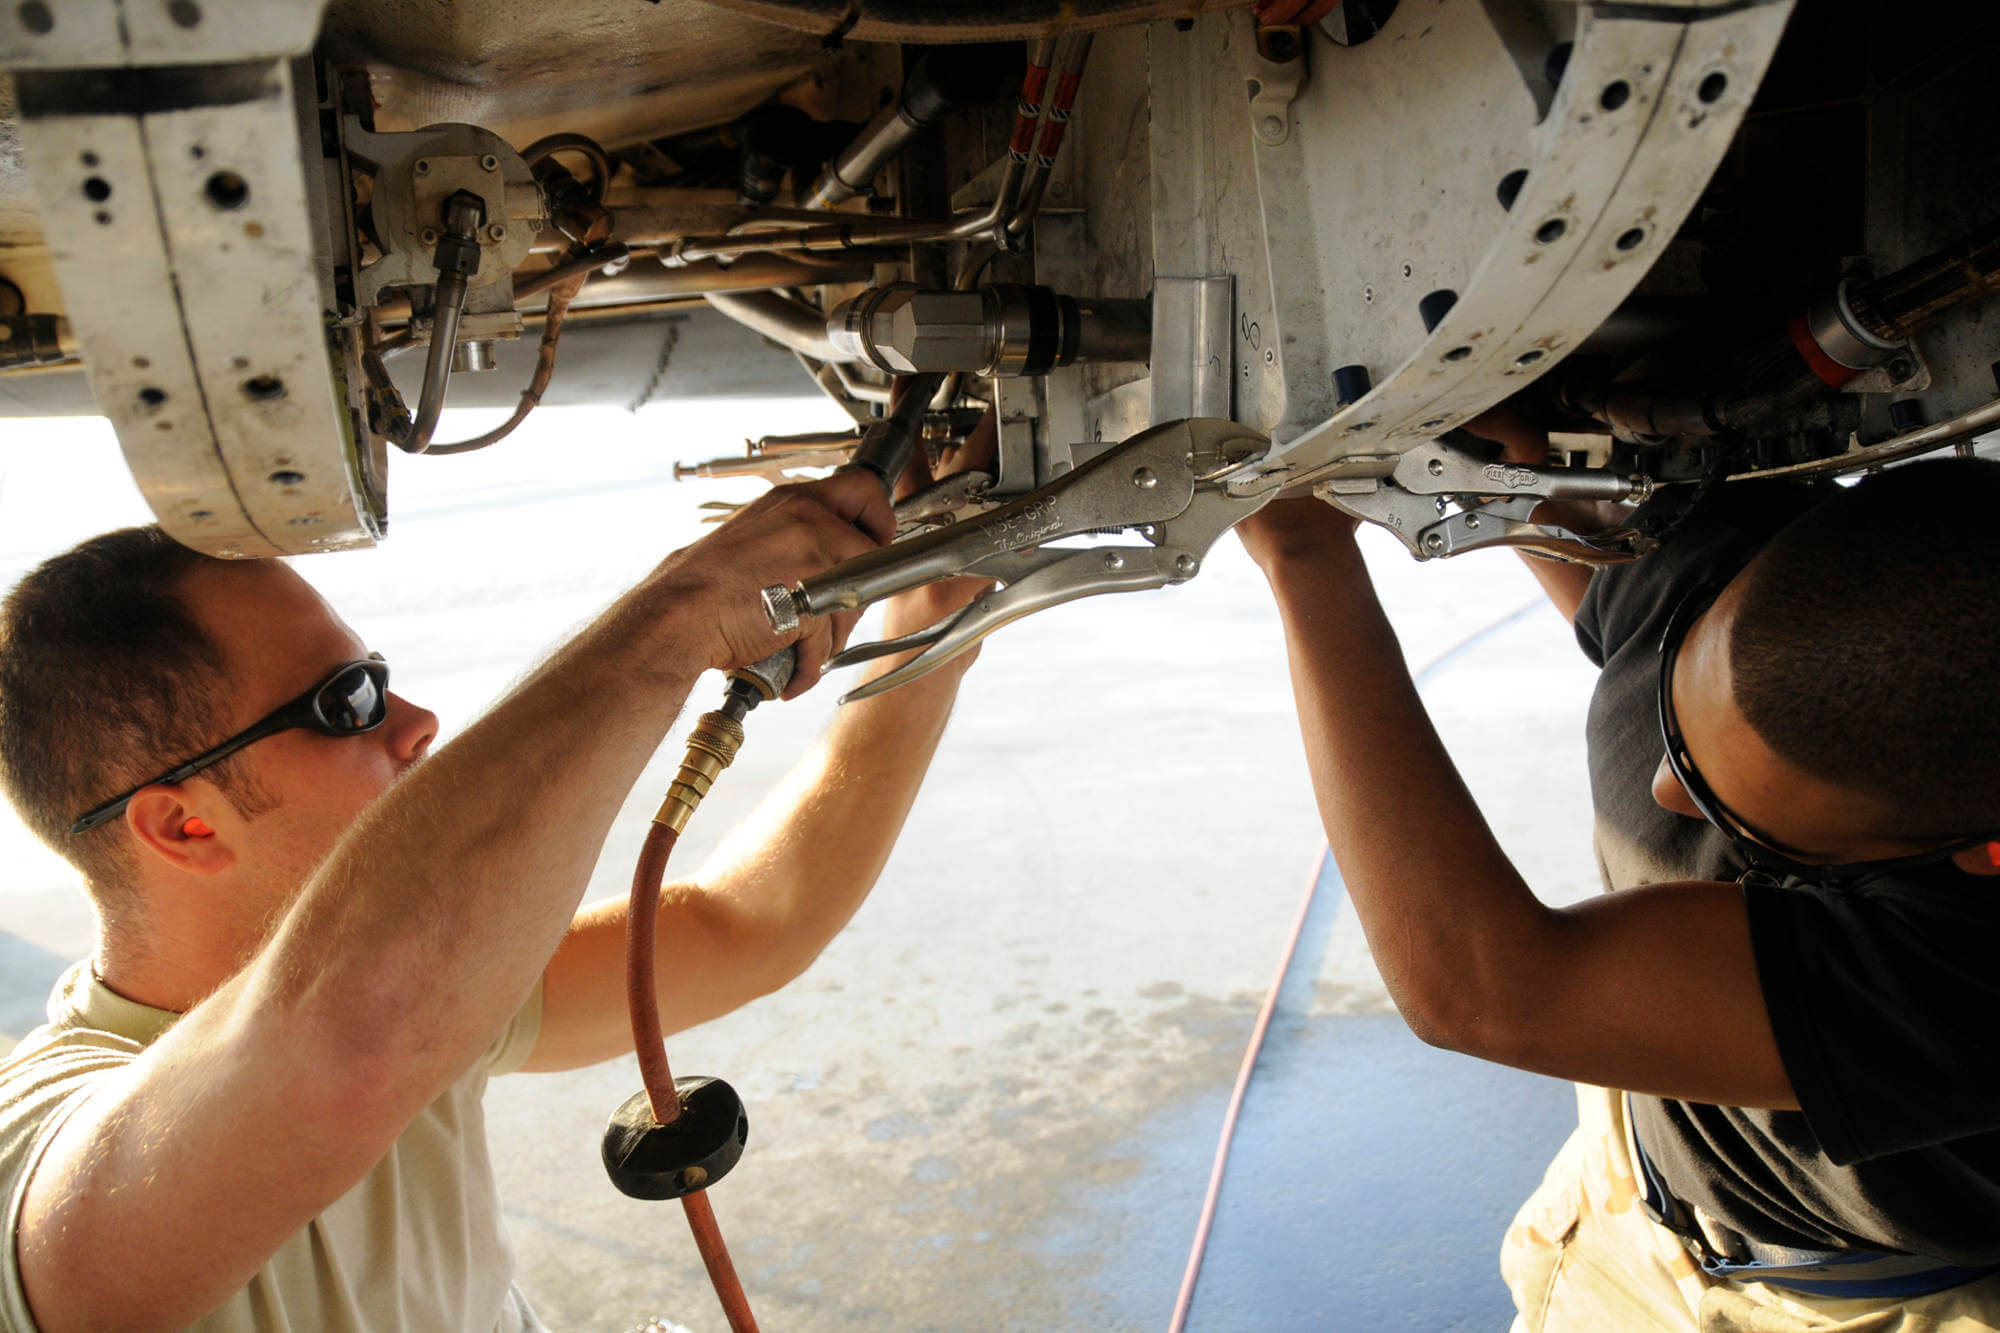 Two aircraft technicians performing structural maintenance